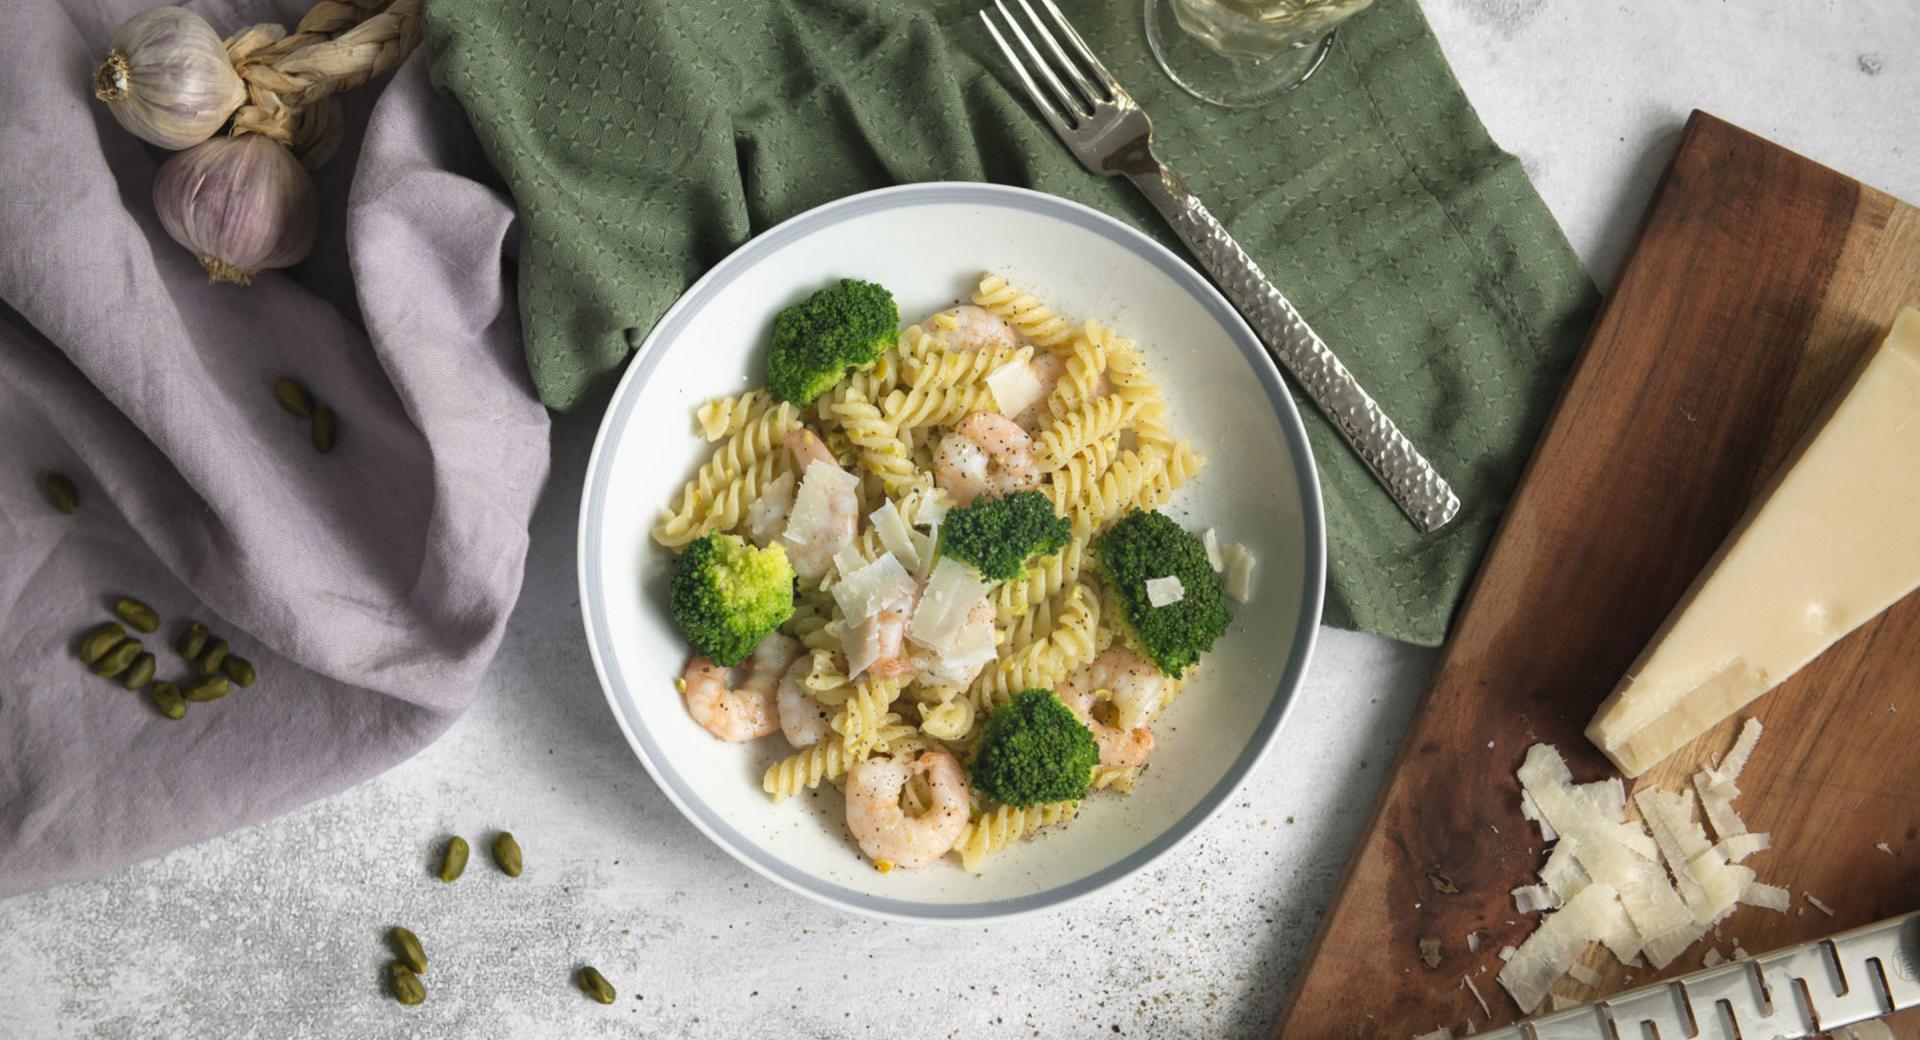 Pasta with shrimp and vegetables